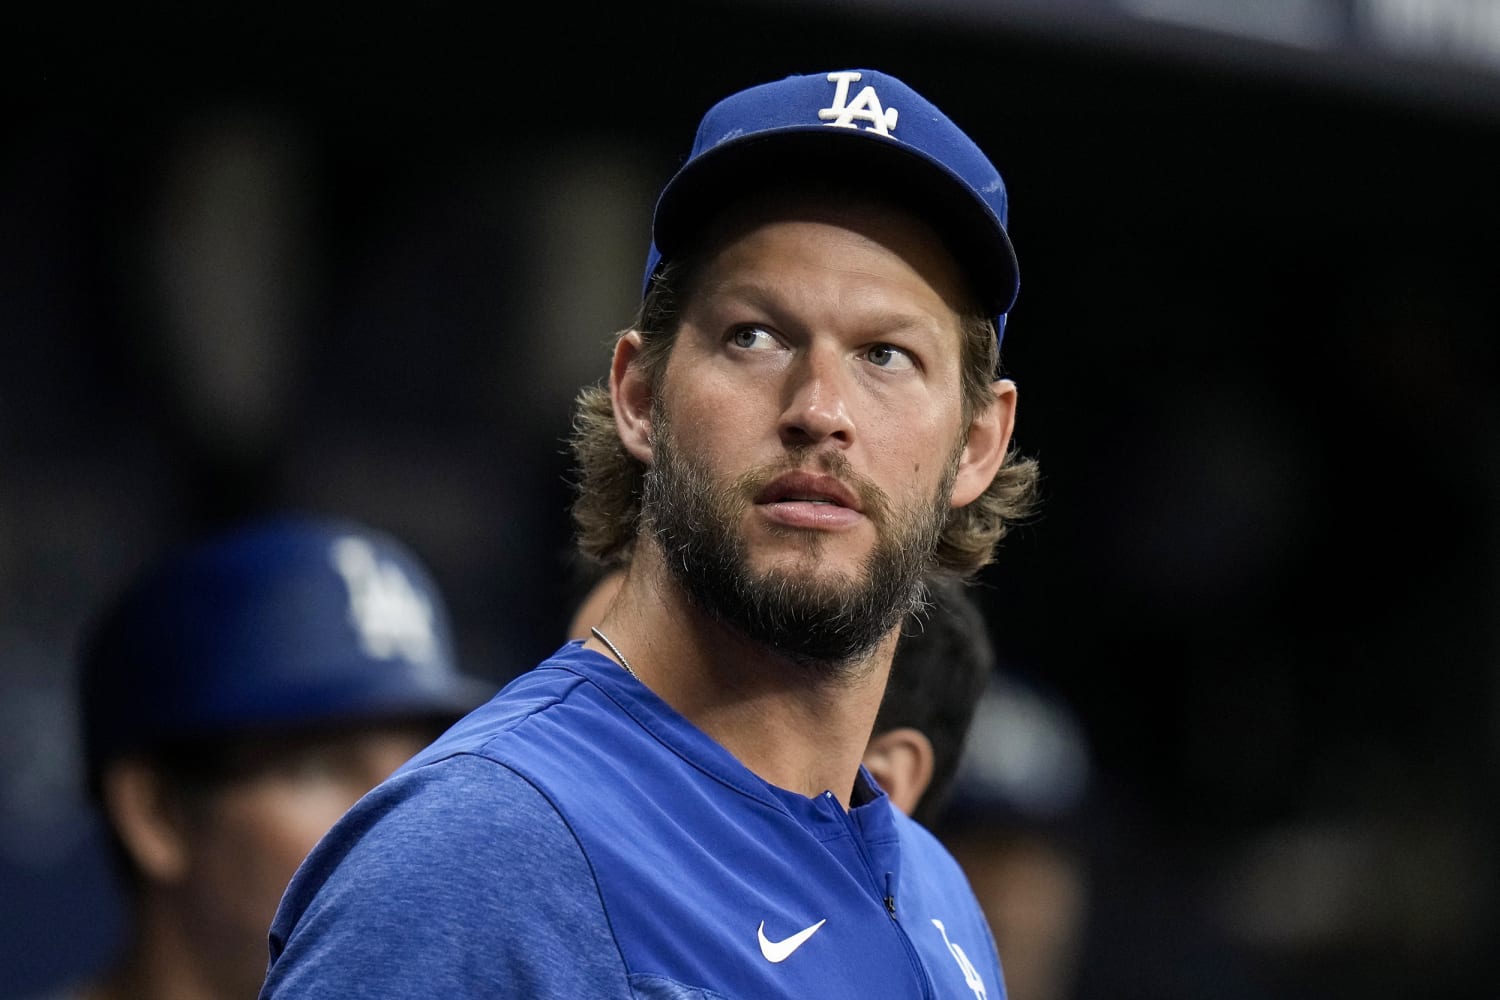 MLB players say the drag squad invited to Dodgers’ Pride Night makes fun of Christianity